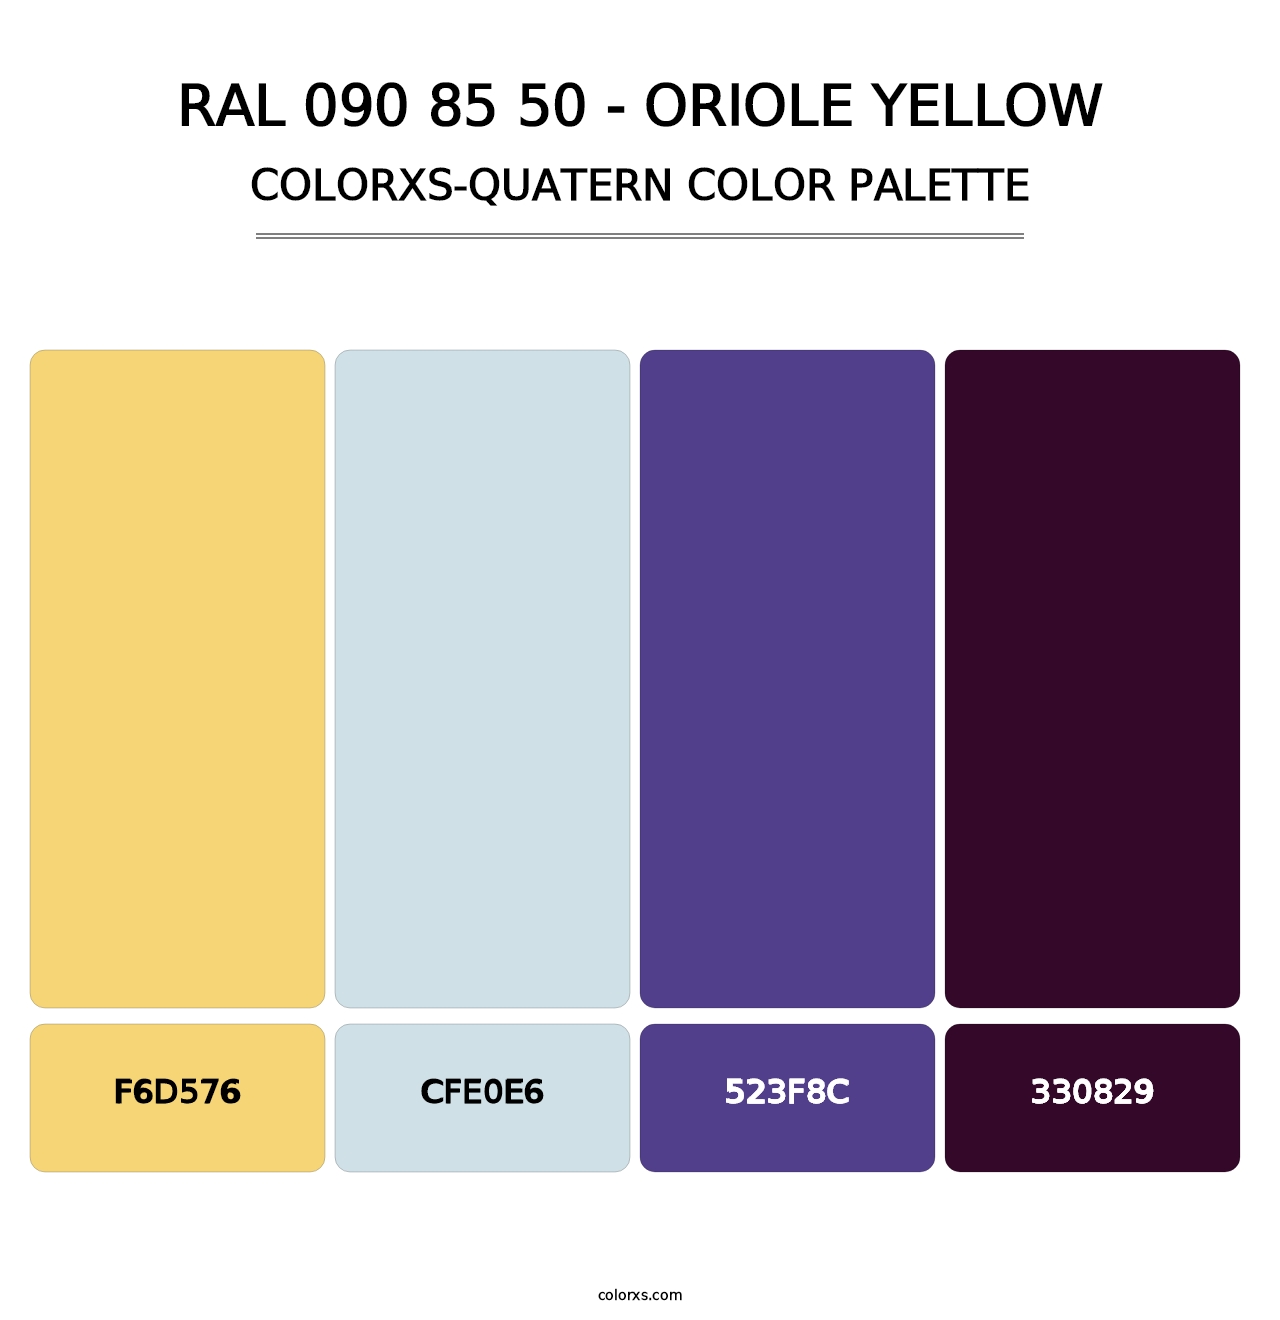 RAL 090 85 50 - Oriole Yellow - Colorxs Quatern Palette